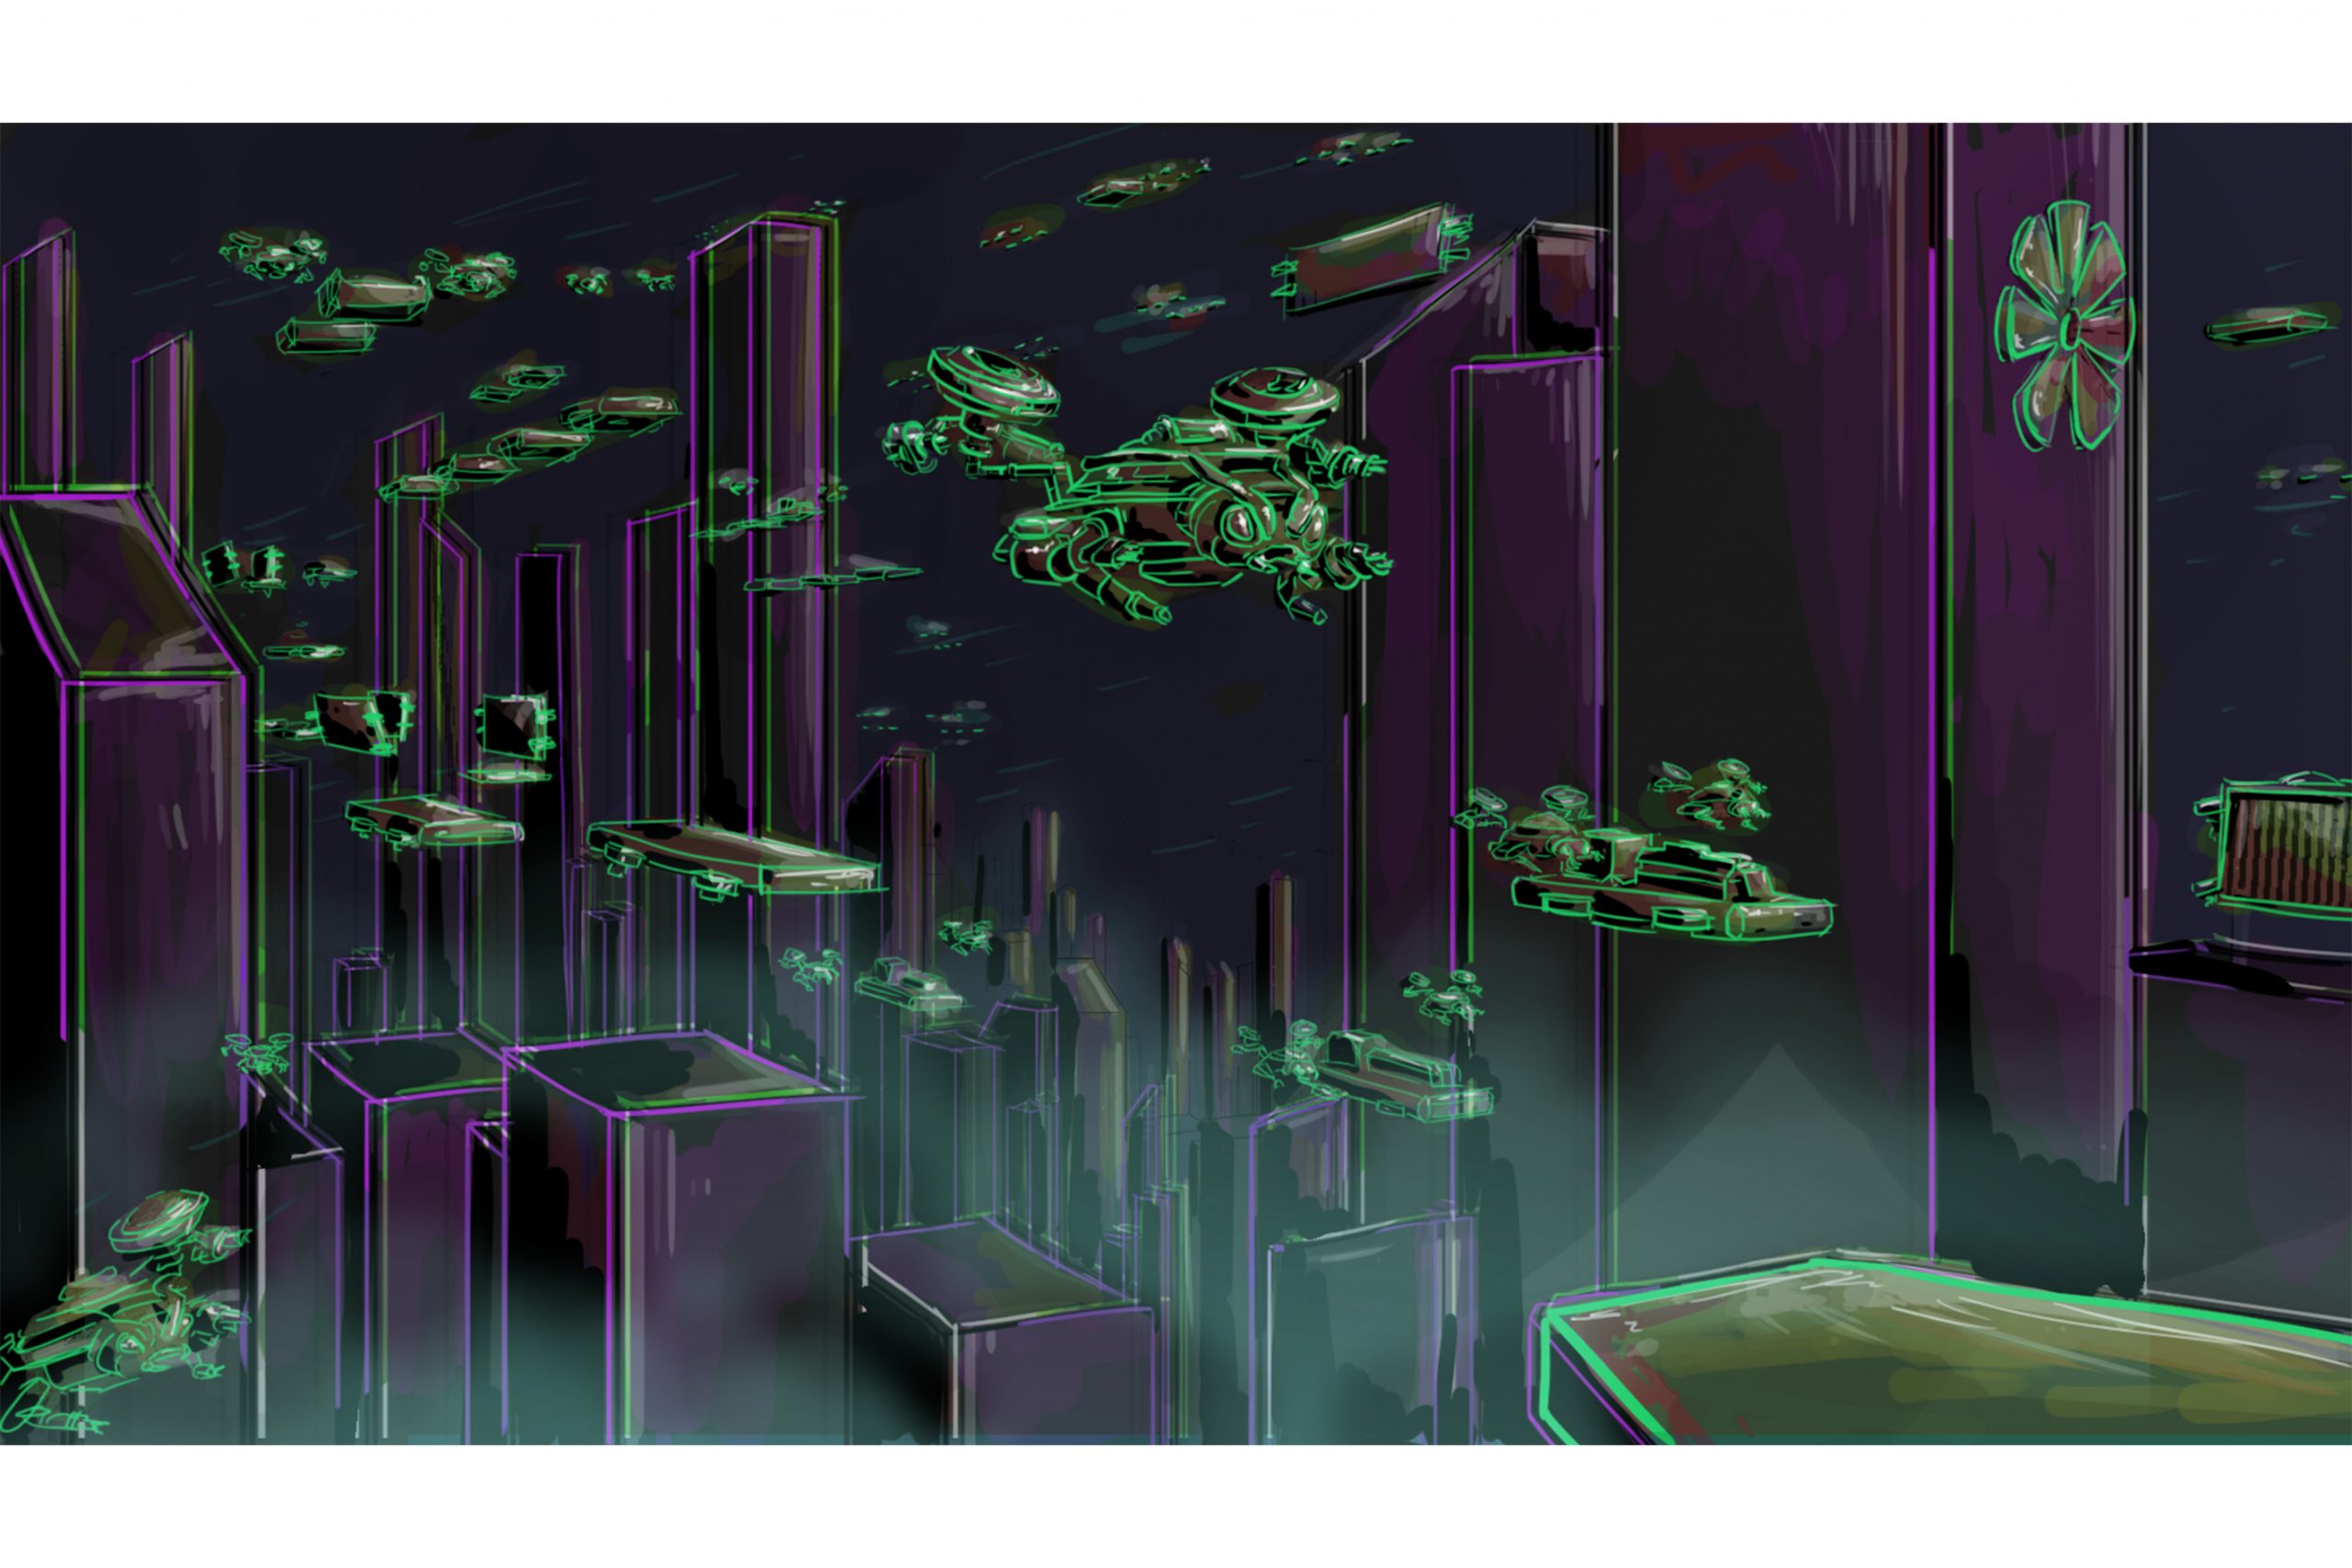 A piece of promotional art for the game "The Trial" by Liquid Cow Studios. The art shows a dark and futuristic high rise with various aspects and floating items outlined in a green colour.